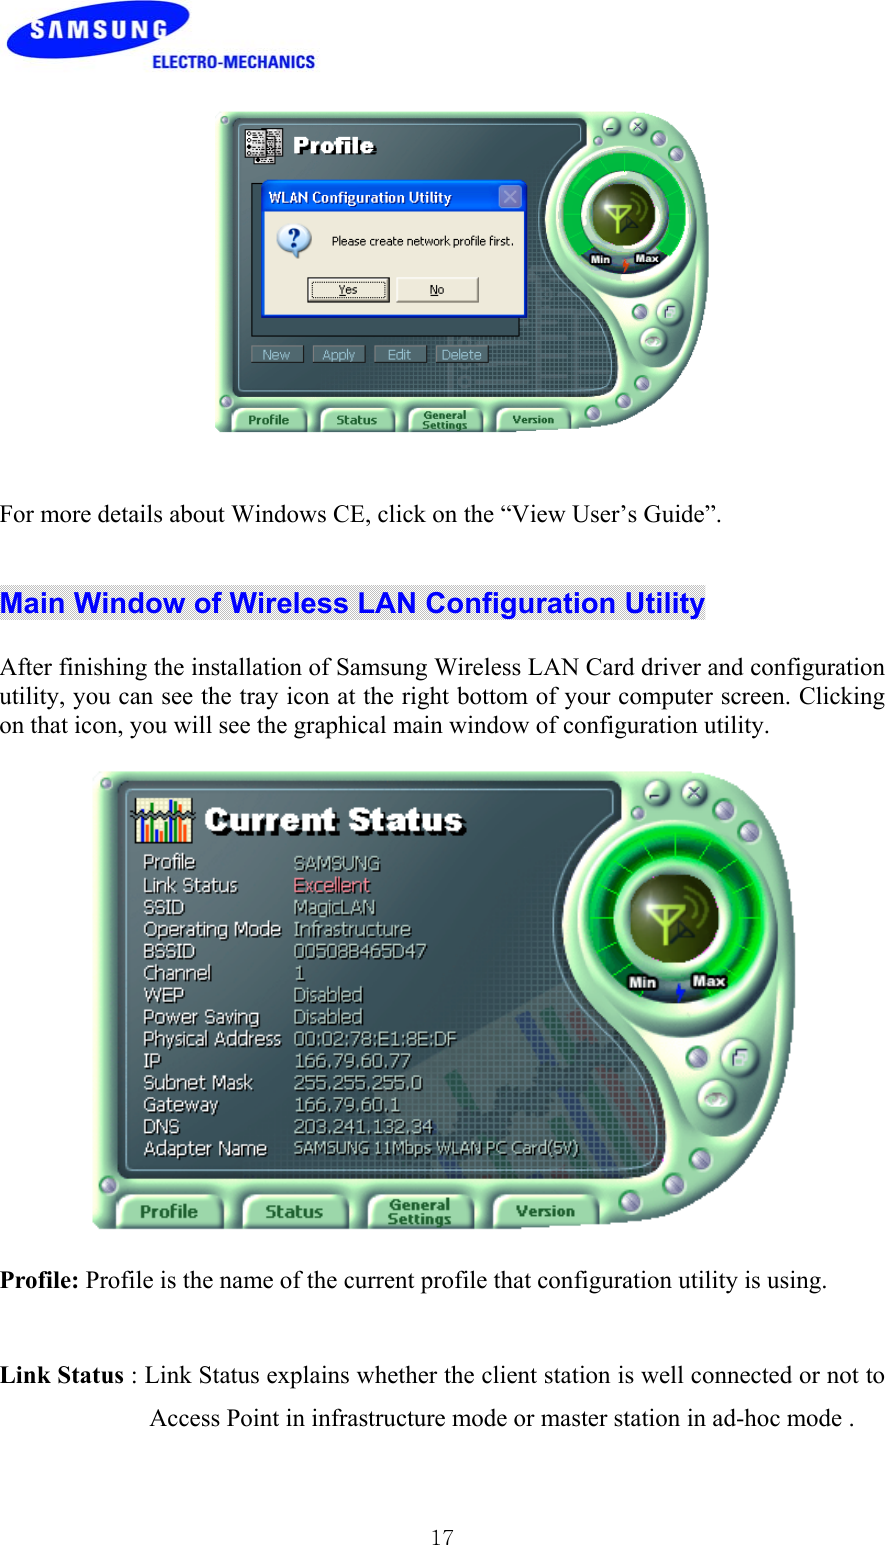 17For more details about Windows CE, click on the “View User’s Guide”.Main Window of Wireless LAN Configuration UtilityAfter finishing the installation of Samsung Wireless LAN Card driver and configurationutility, you can see the tray icon at the right bottom of your computer screen. Clickingon that icon, you will see the graphical main window of configuration utility.Profile: Profile is the name of the current profile that configuration utility is using.Link Status : Link Status explains whether the client station is well connected or not toAccess Point in infrastructure mode or master station in ad-hoc mode .